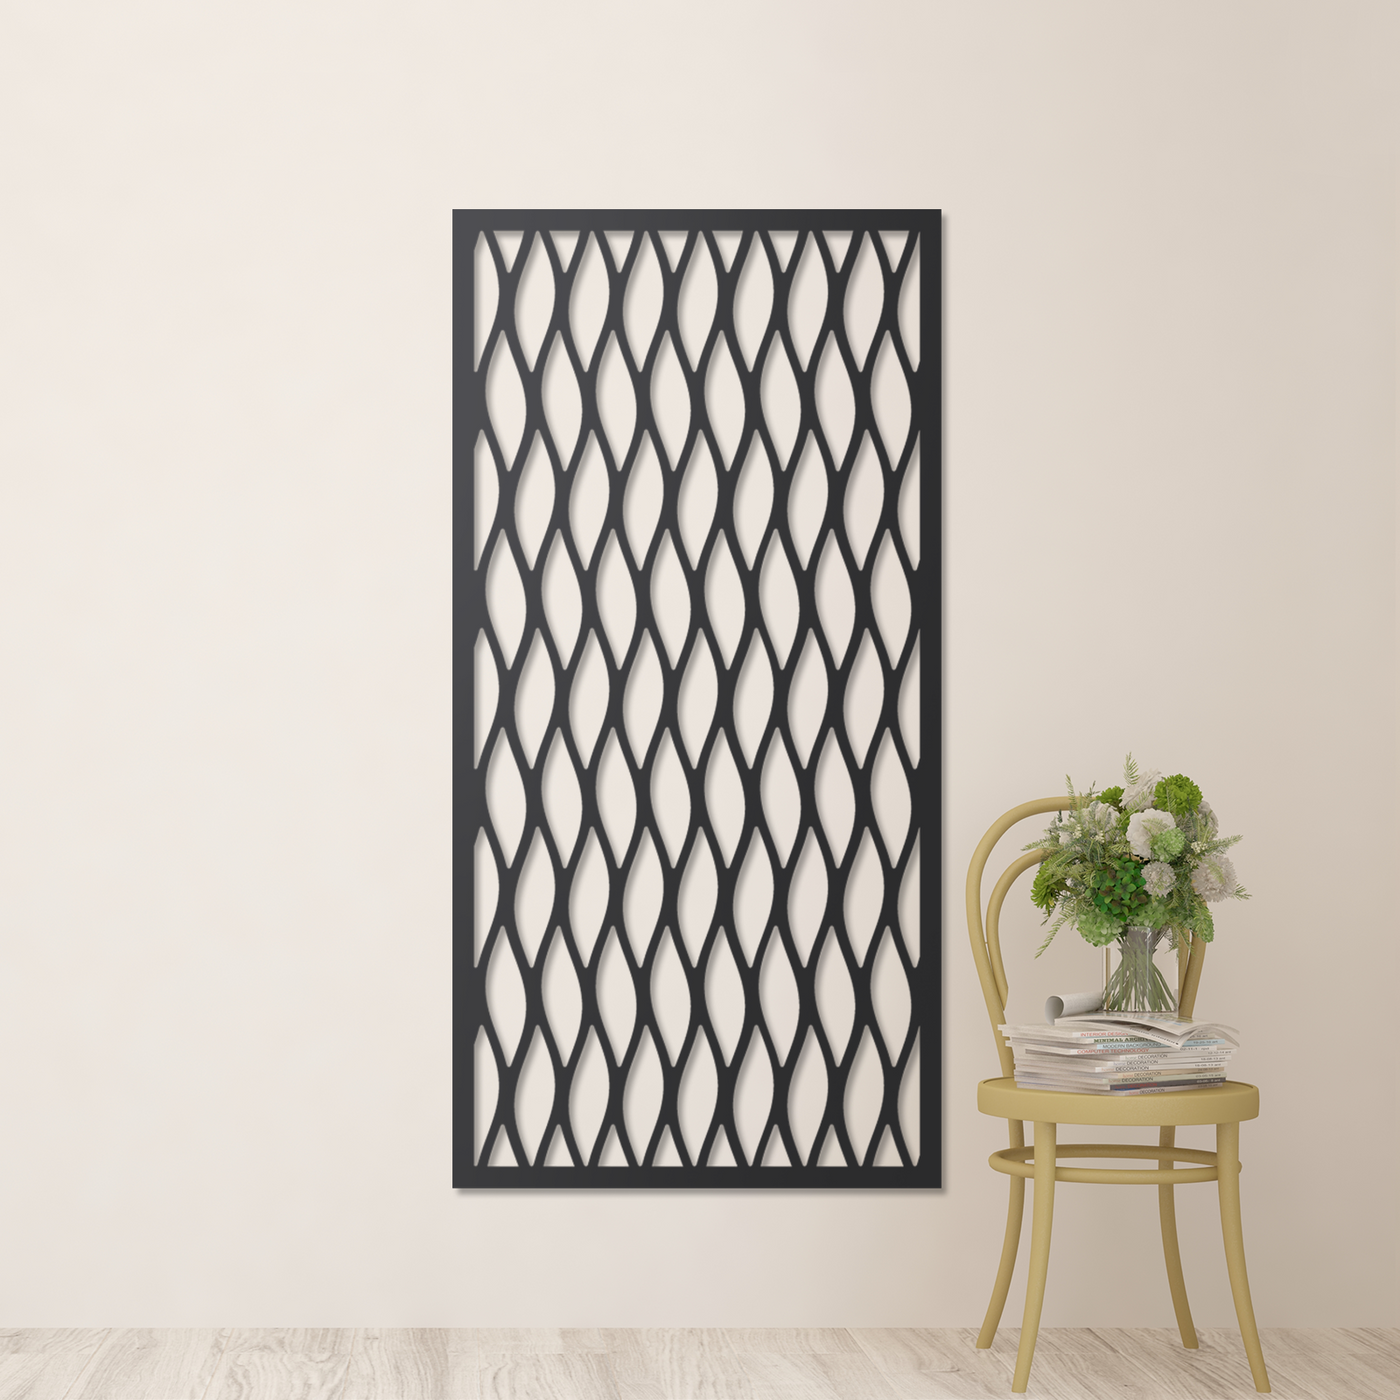 Chainlink Metal Screen: The Perfect Way to Keep Your Garden Private and Stylish